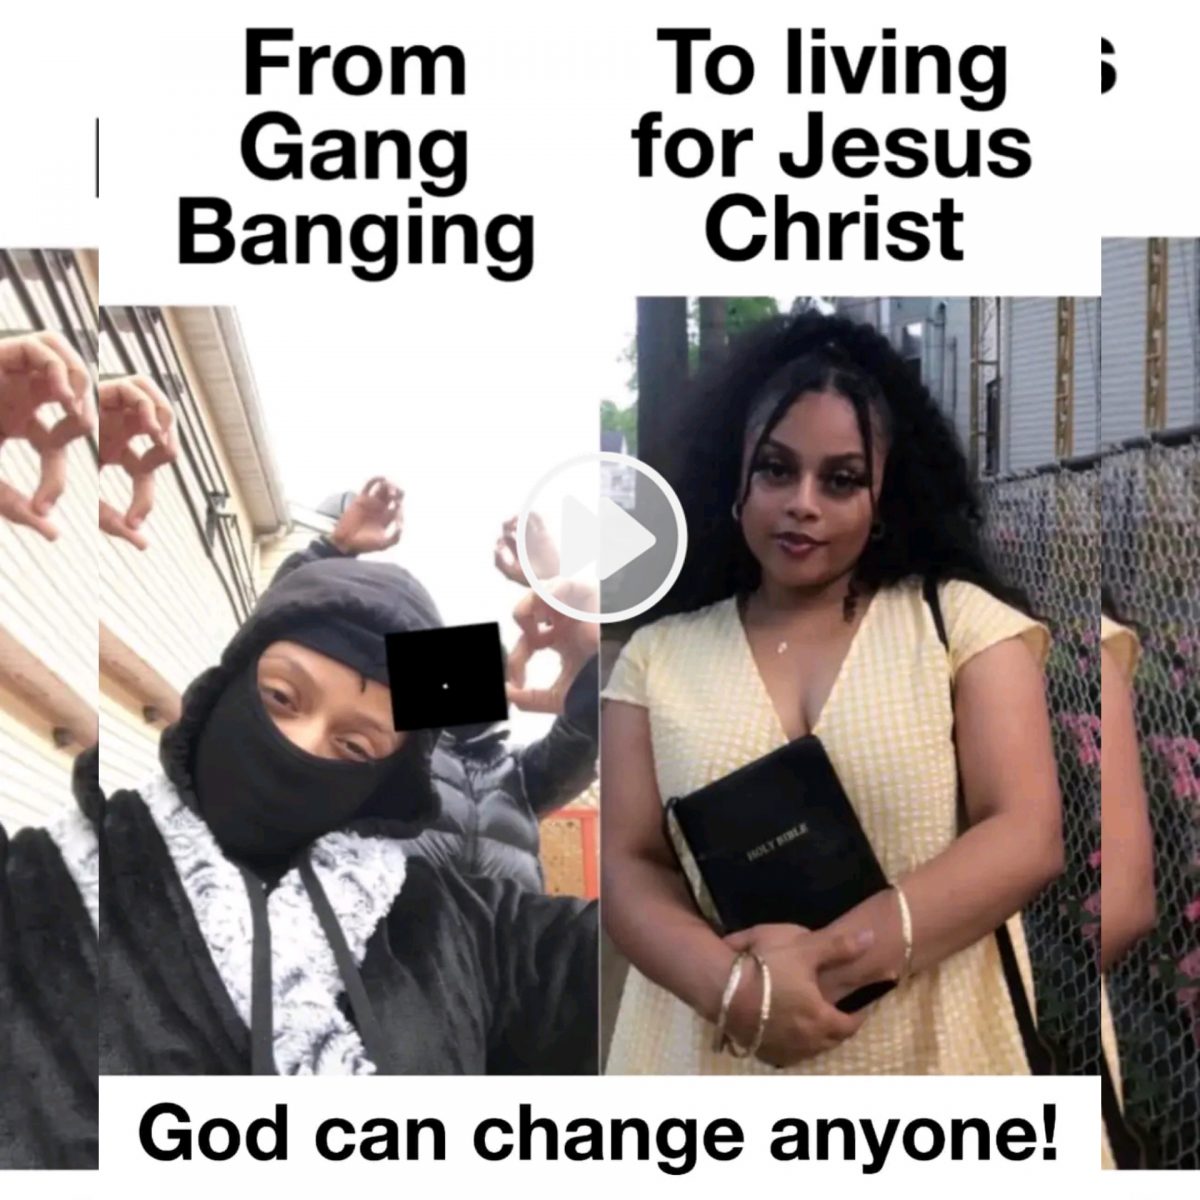 From Gang Banging to living for Jesus Christ